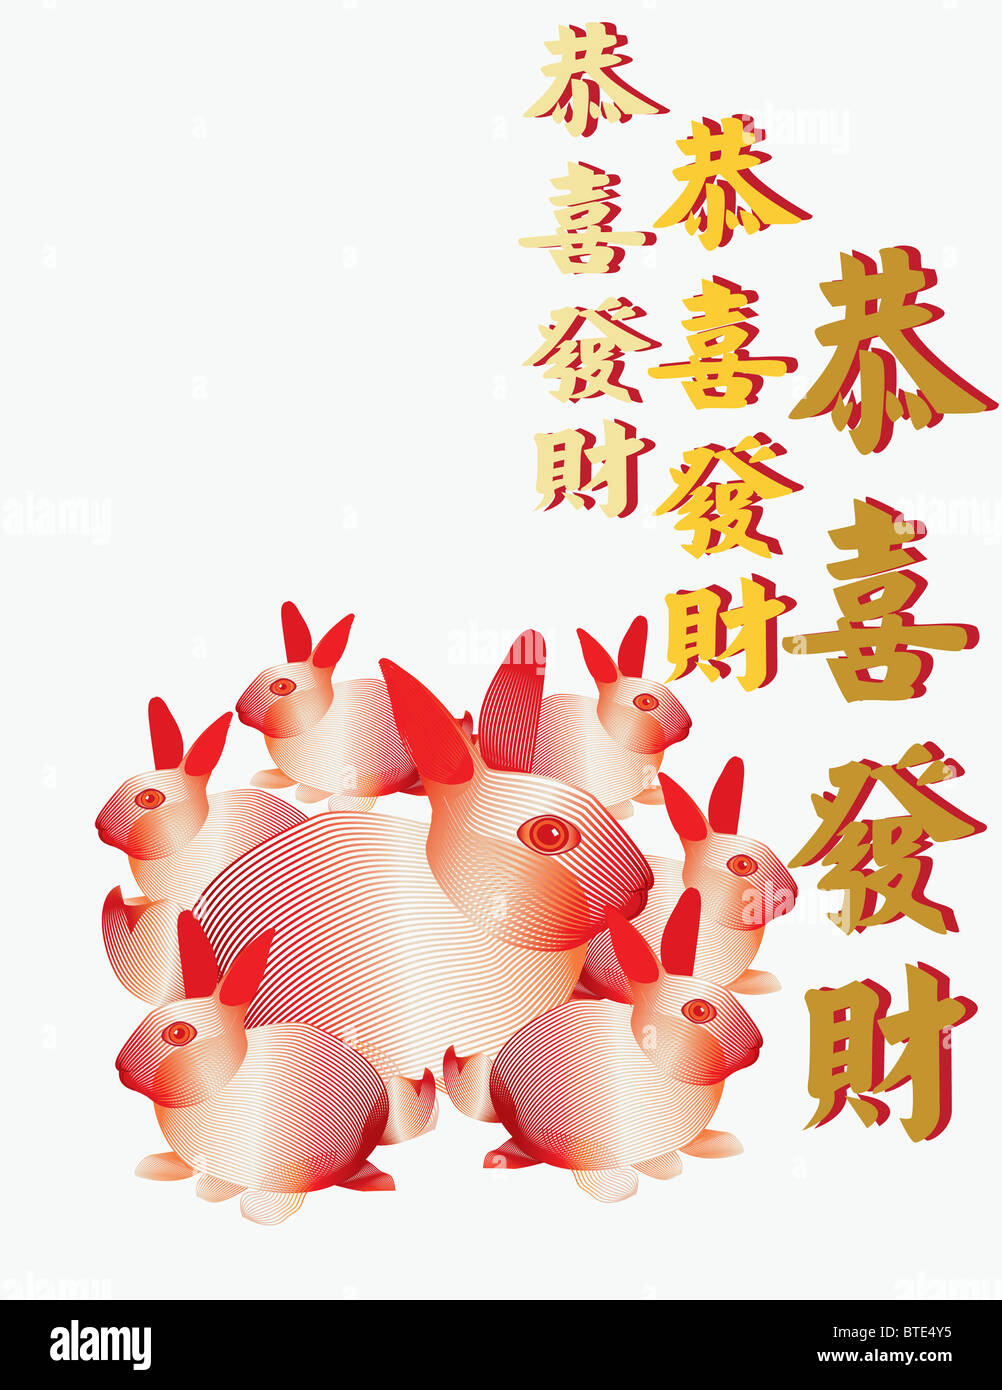 A greeting for Chinese New Year 2011 Stock Photo